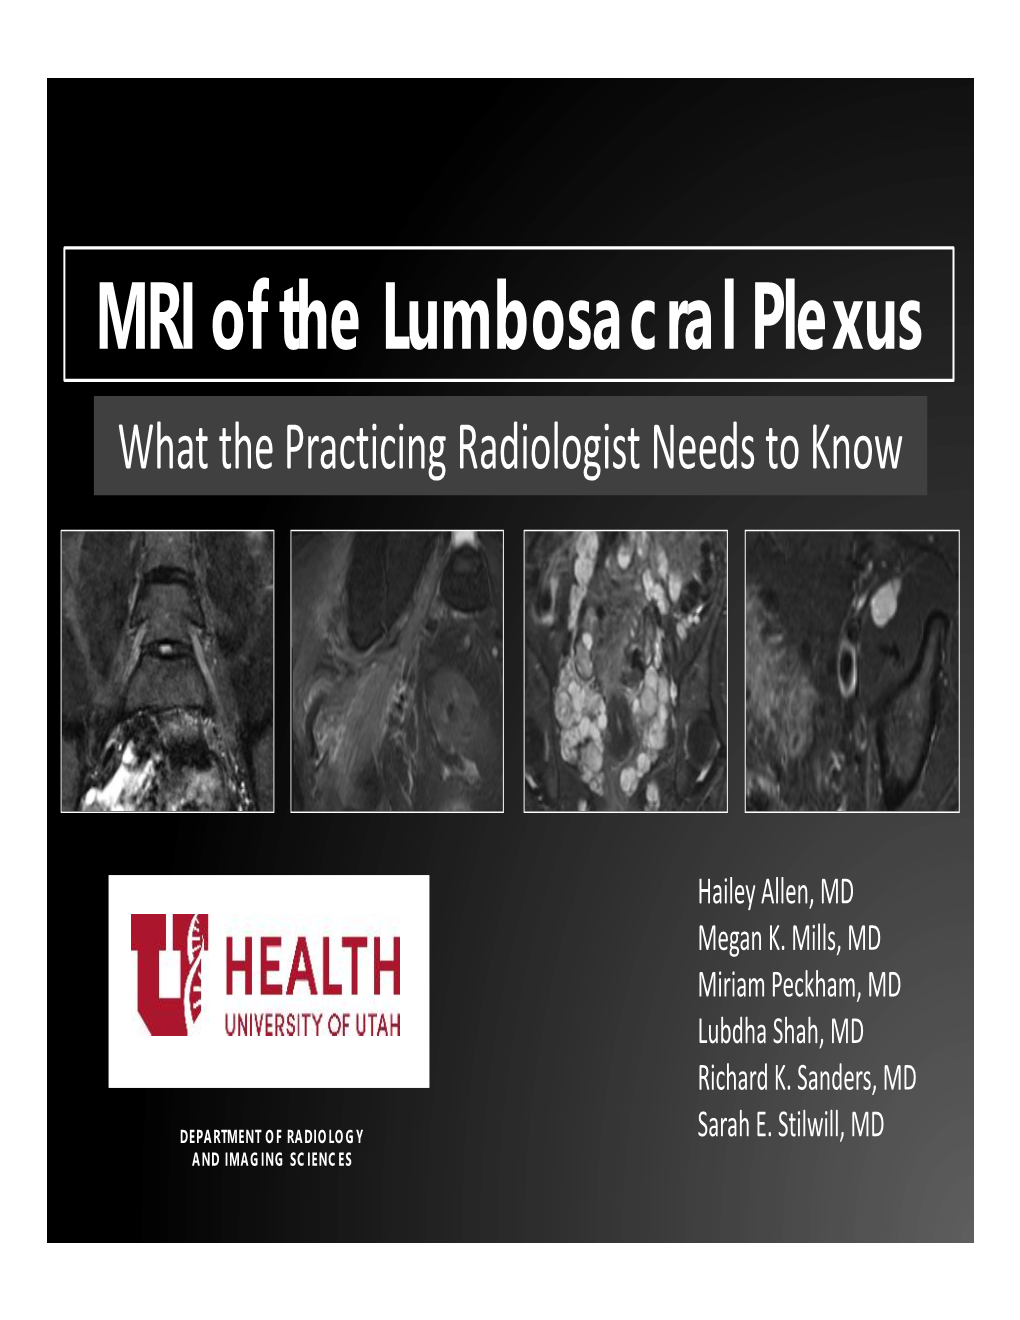 MRI of the Lumbosacral Plexus What the Practicing Radiologist Needs to Know